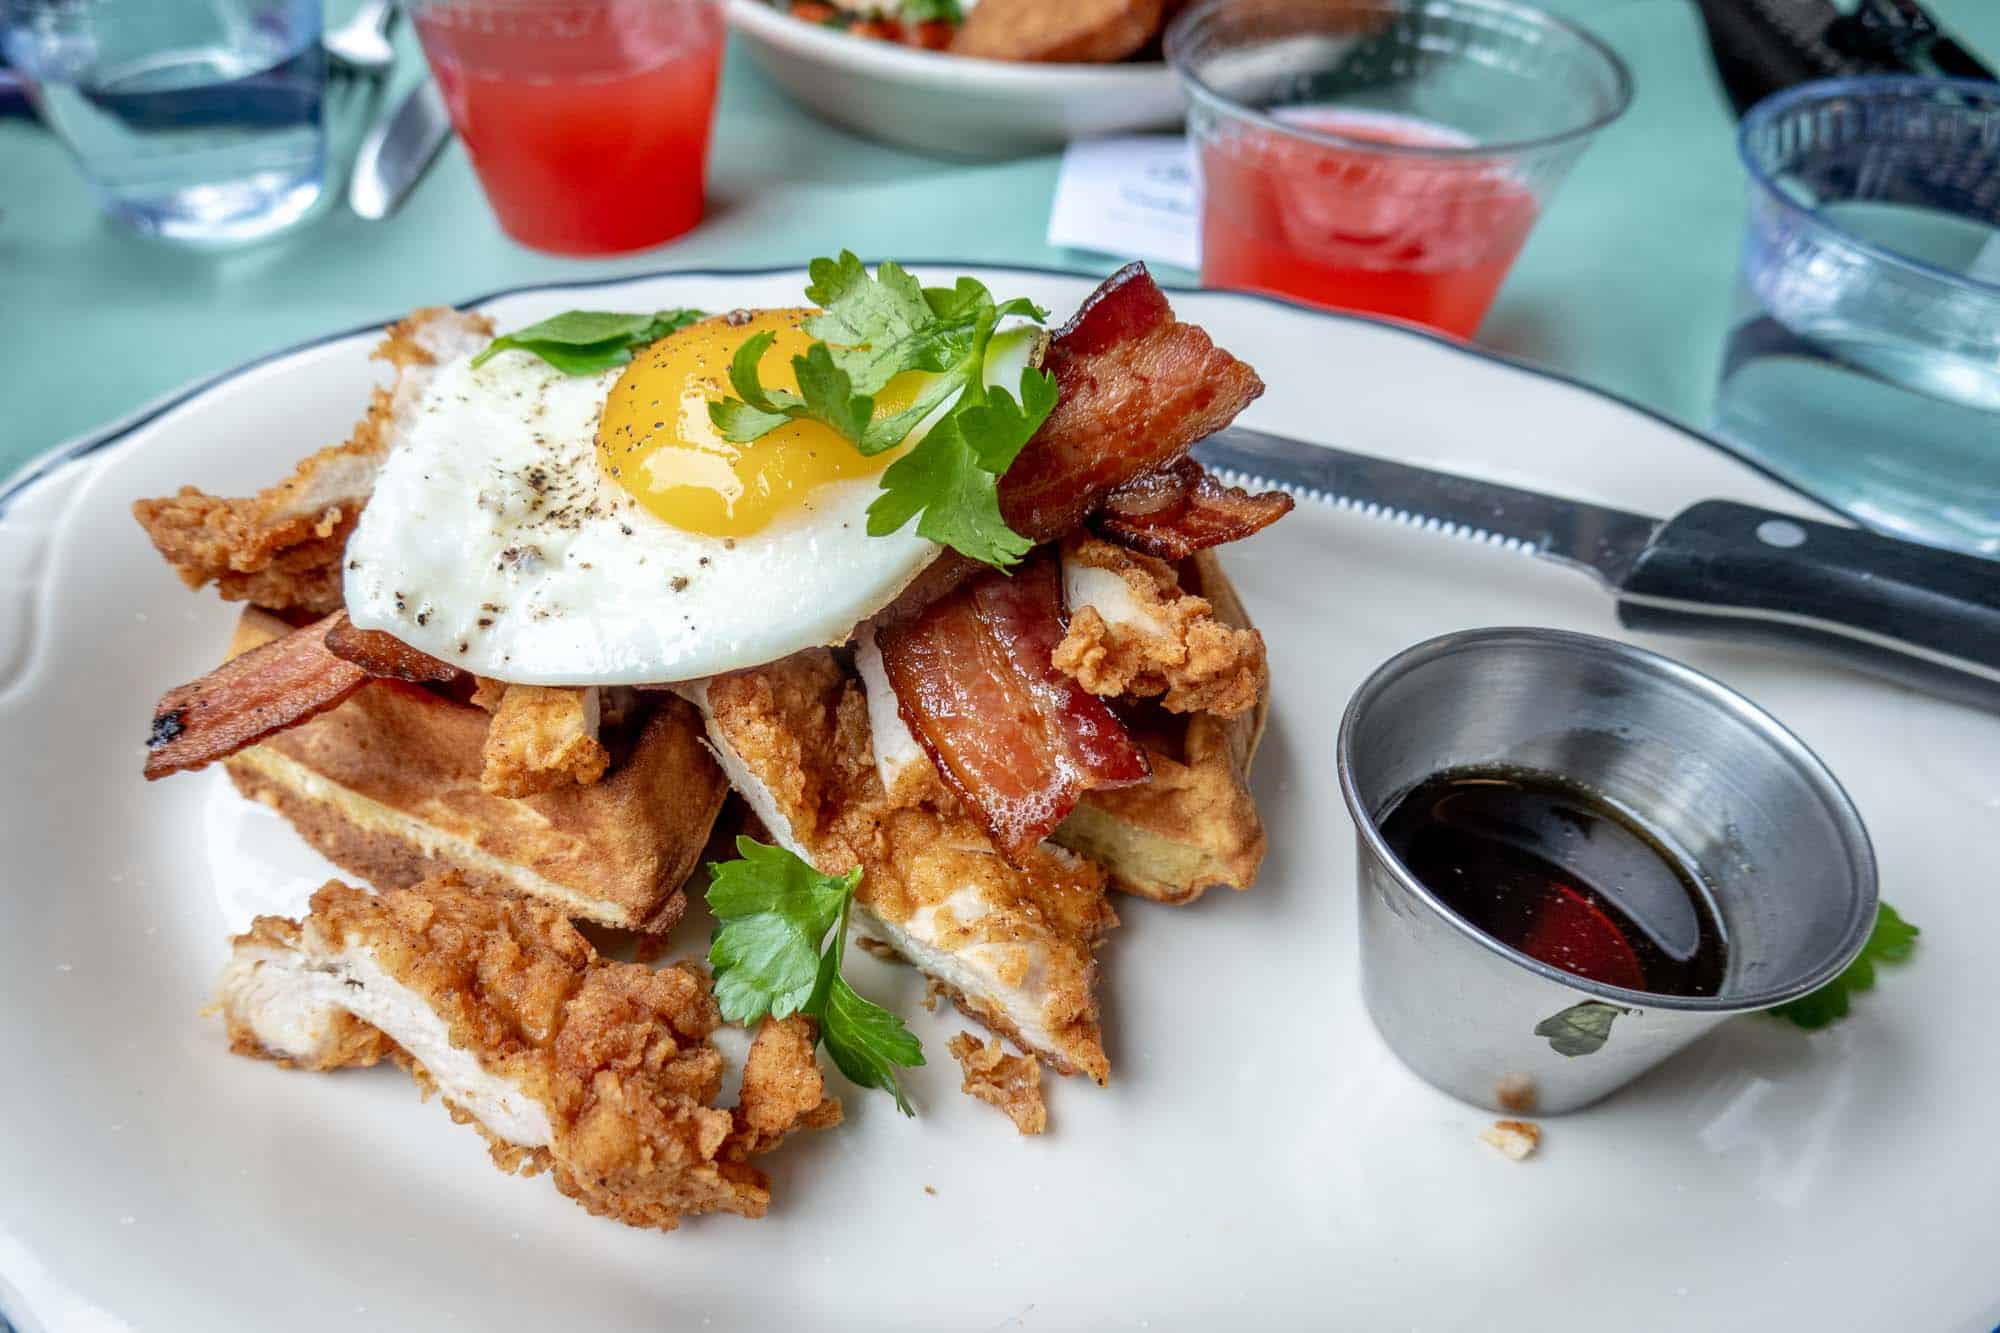 Egg on fried chicken & waffles